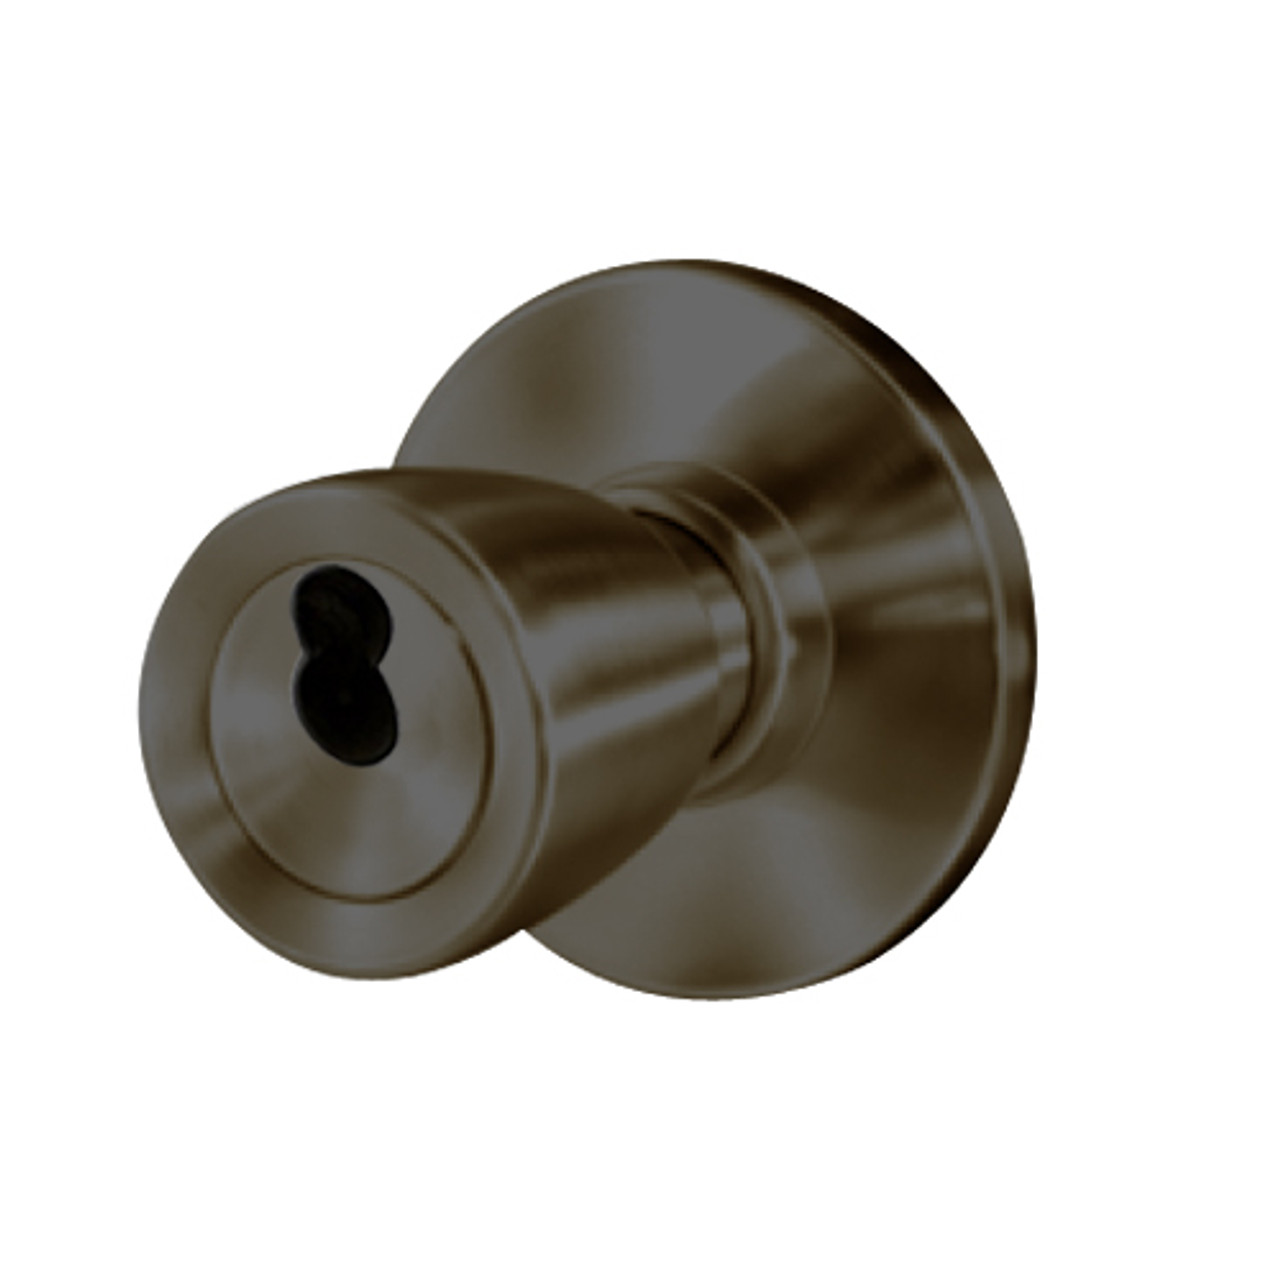 8K37XR6ASTK613 Best 8K Series Special Heavy Duty Cylindrical Knob Locks with Tulip Style in Oil Rubbed Bronze